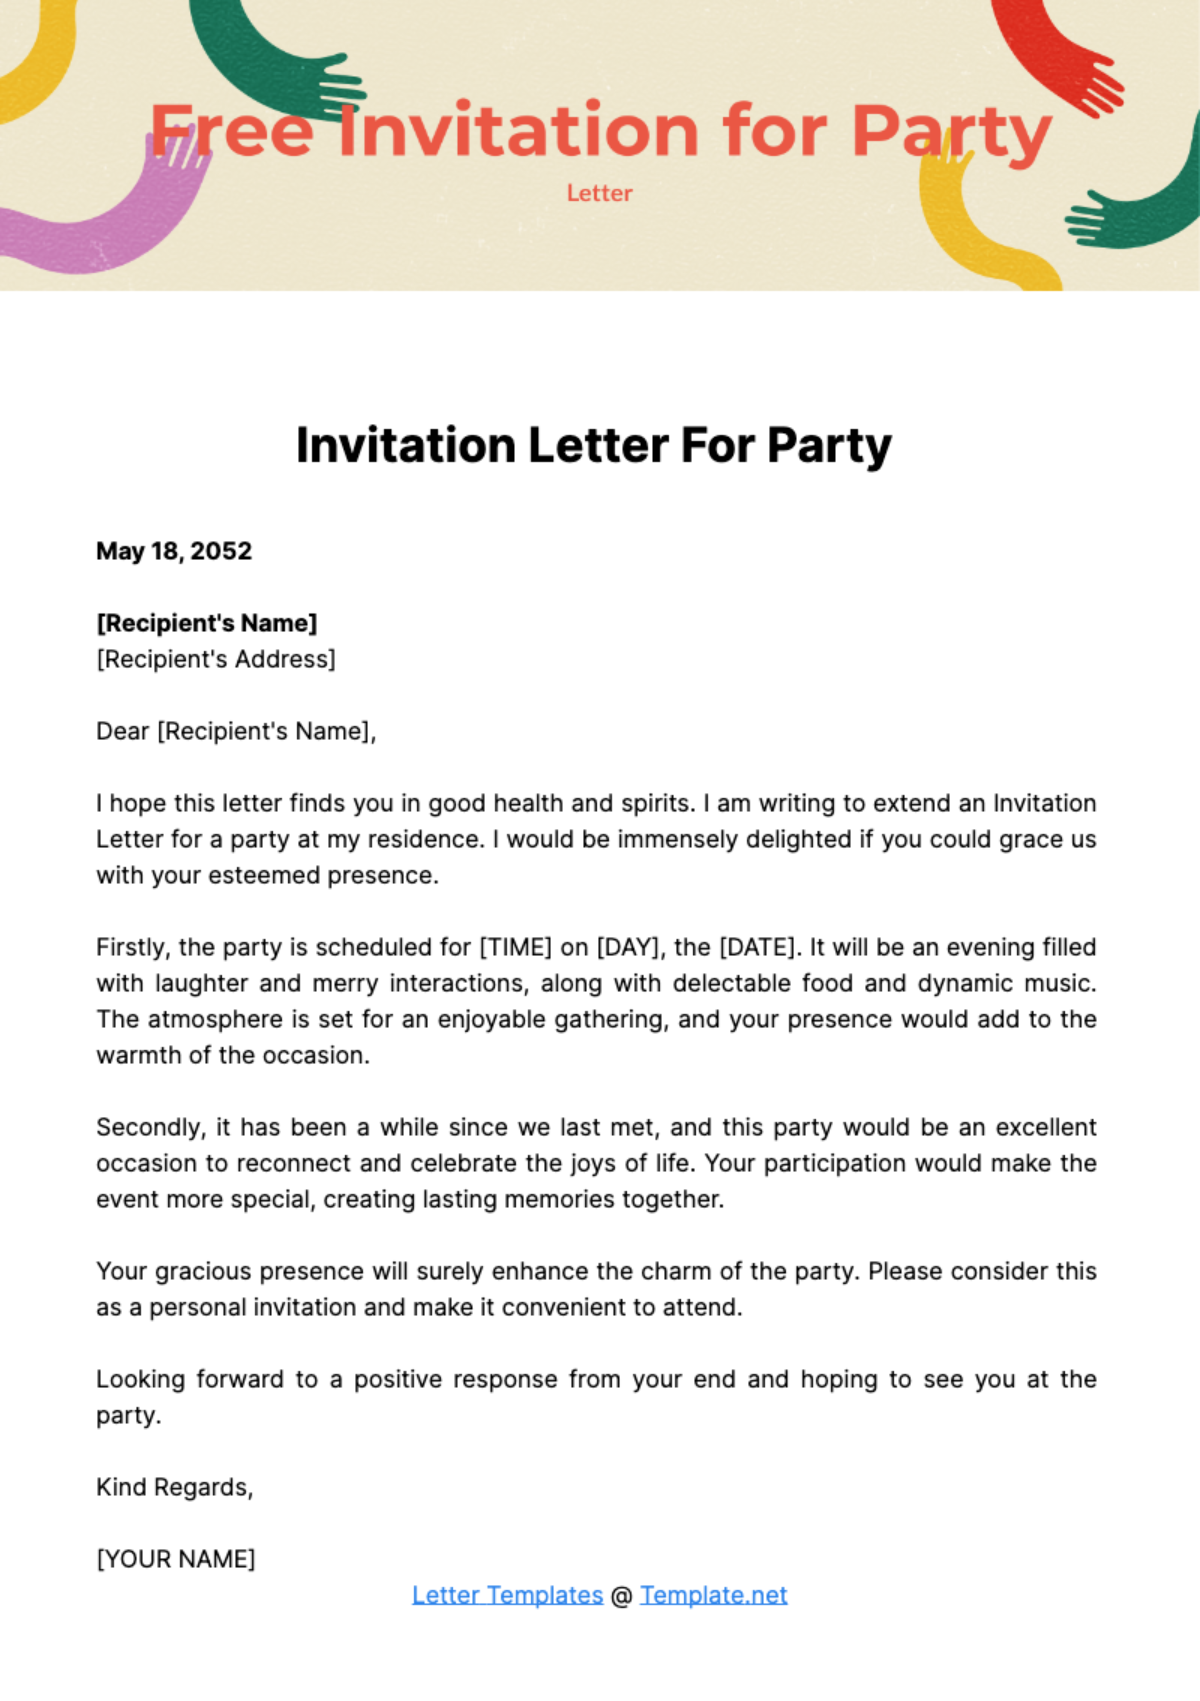 Free Invitation Letter for Party Template